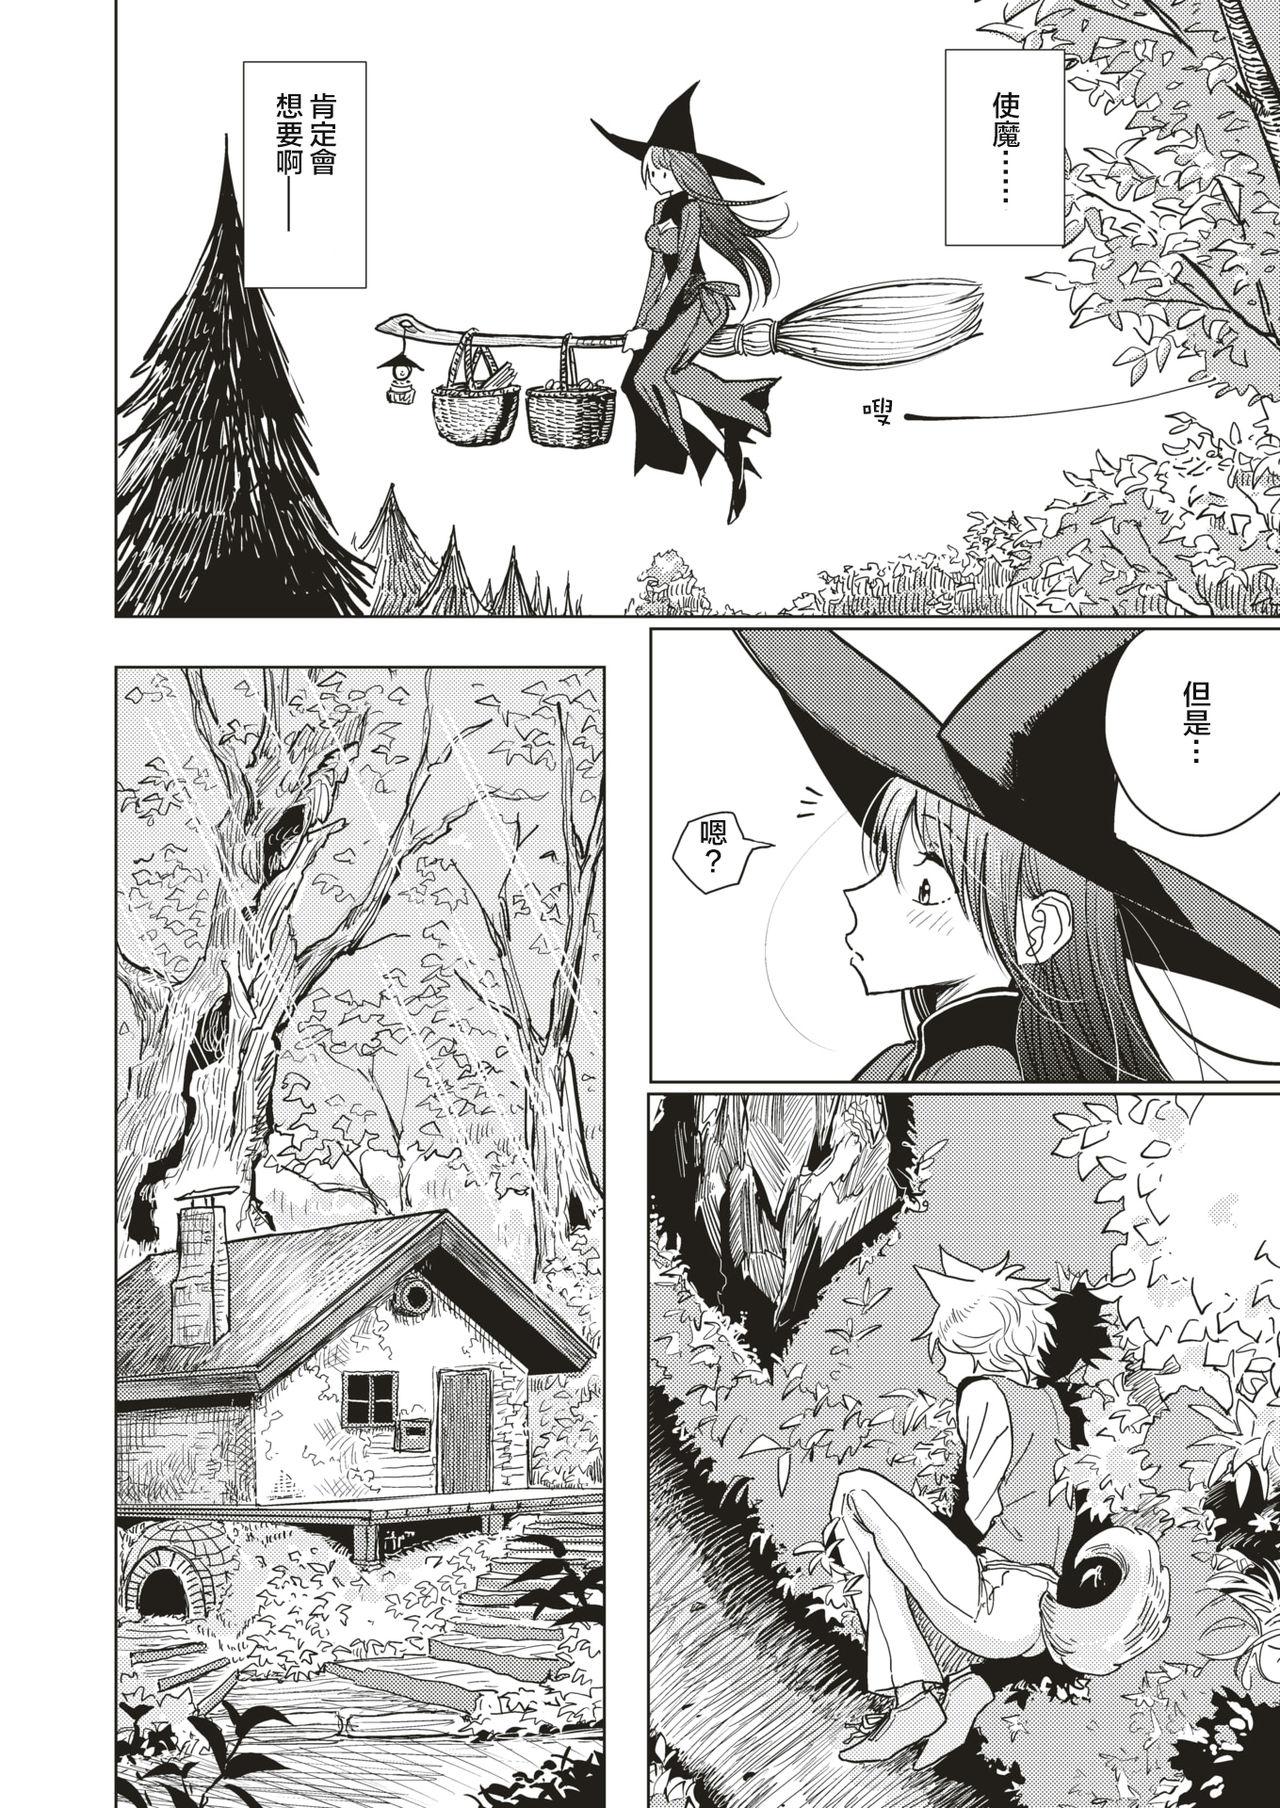 Exgf Keiyaku - Contract with the witch Free Fucking - Page 3